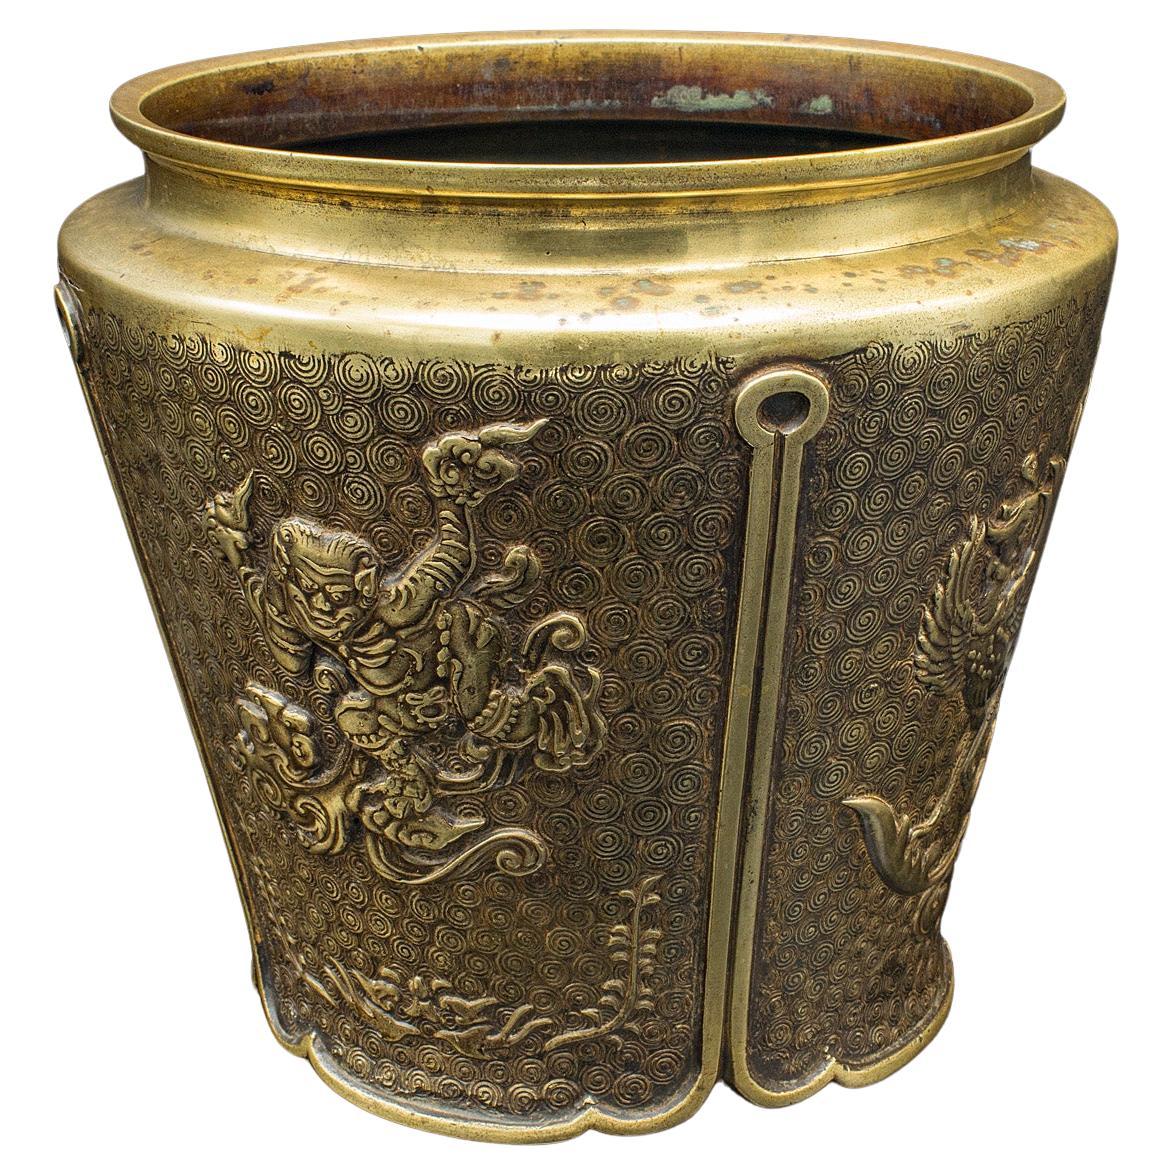 Antique Decorative Planter, Chinese, Bronze, Jardiniere, Qing Dynasty, Victorian